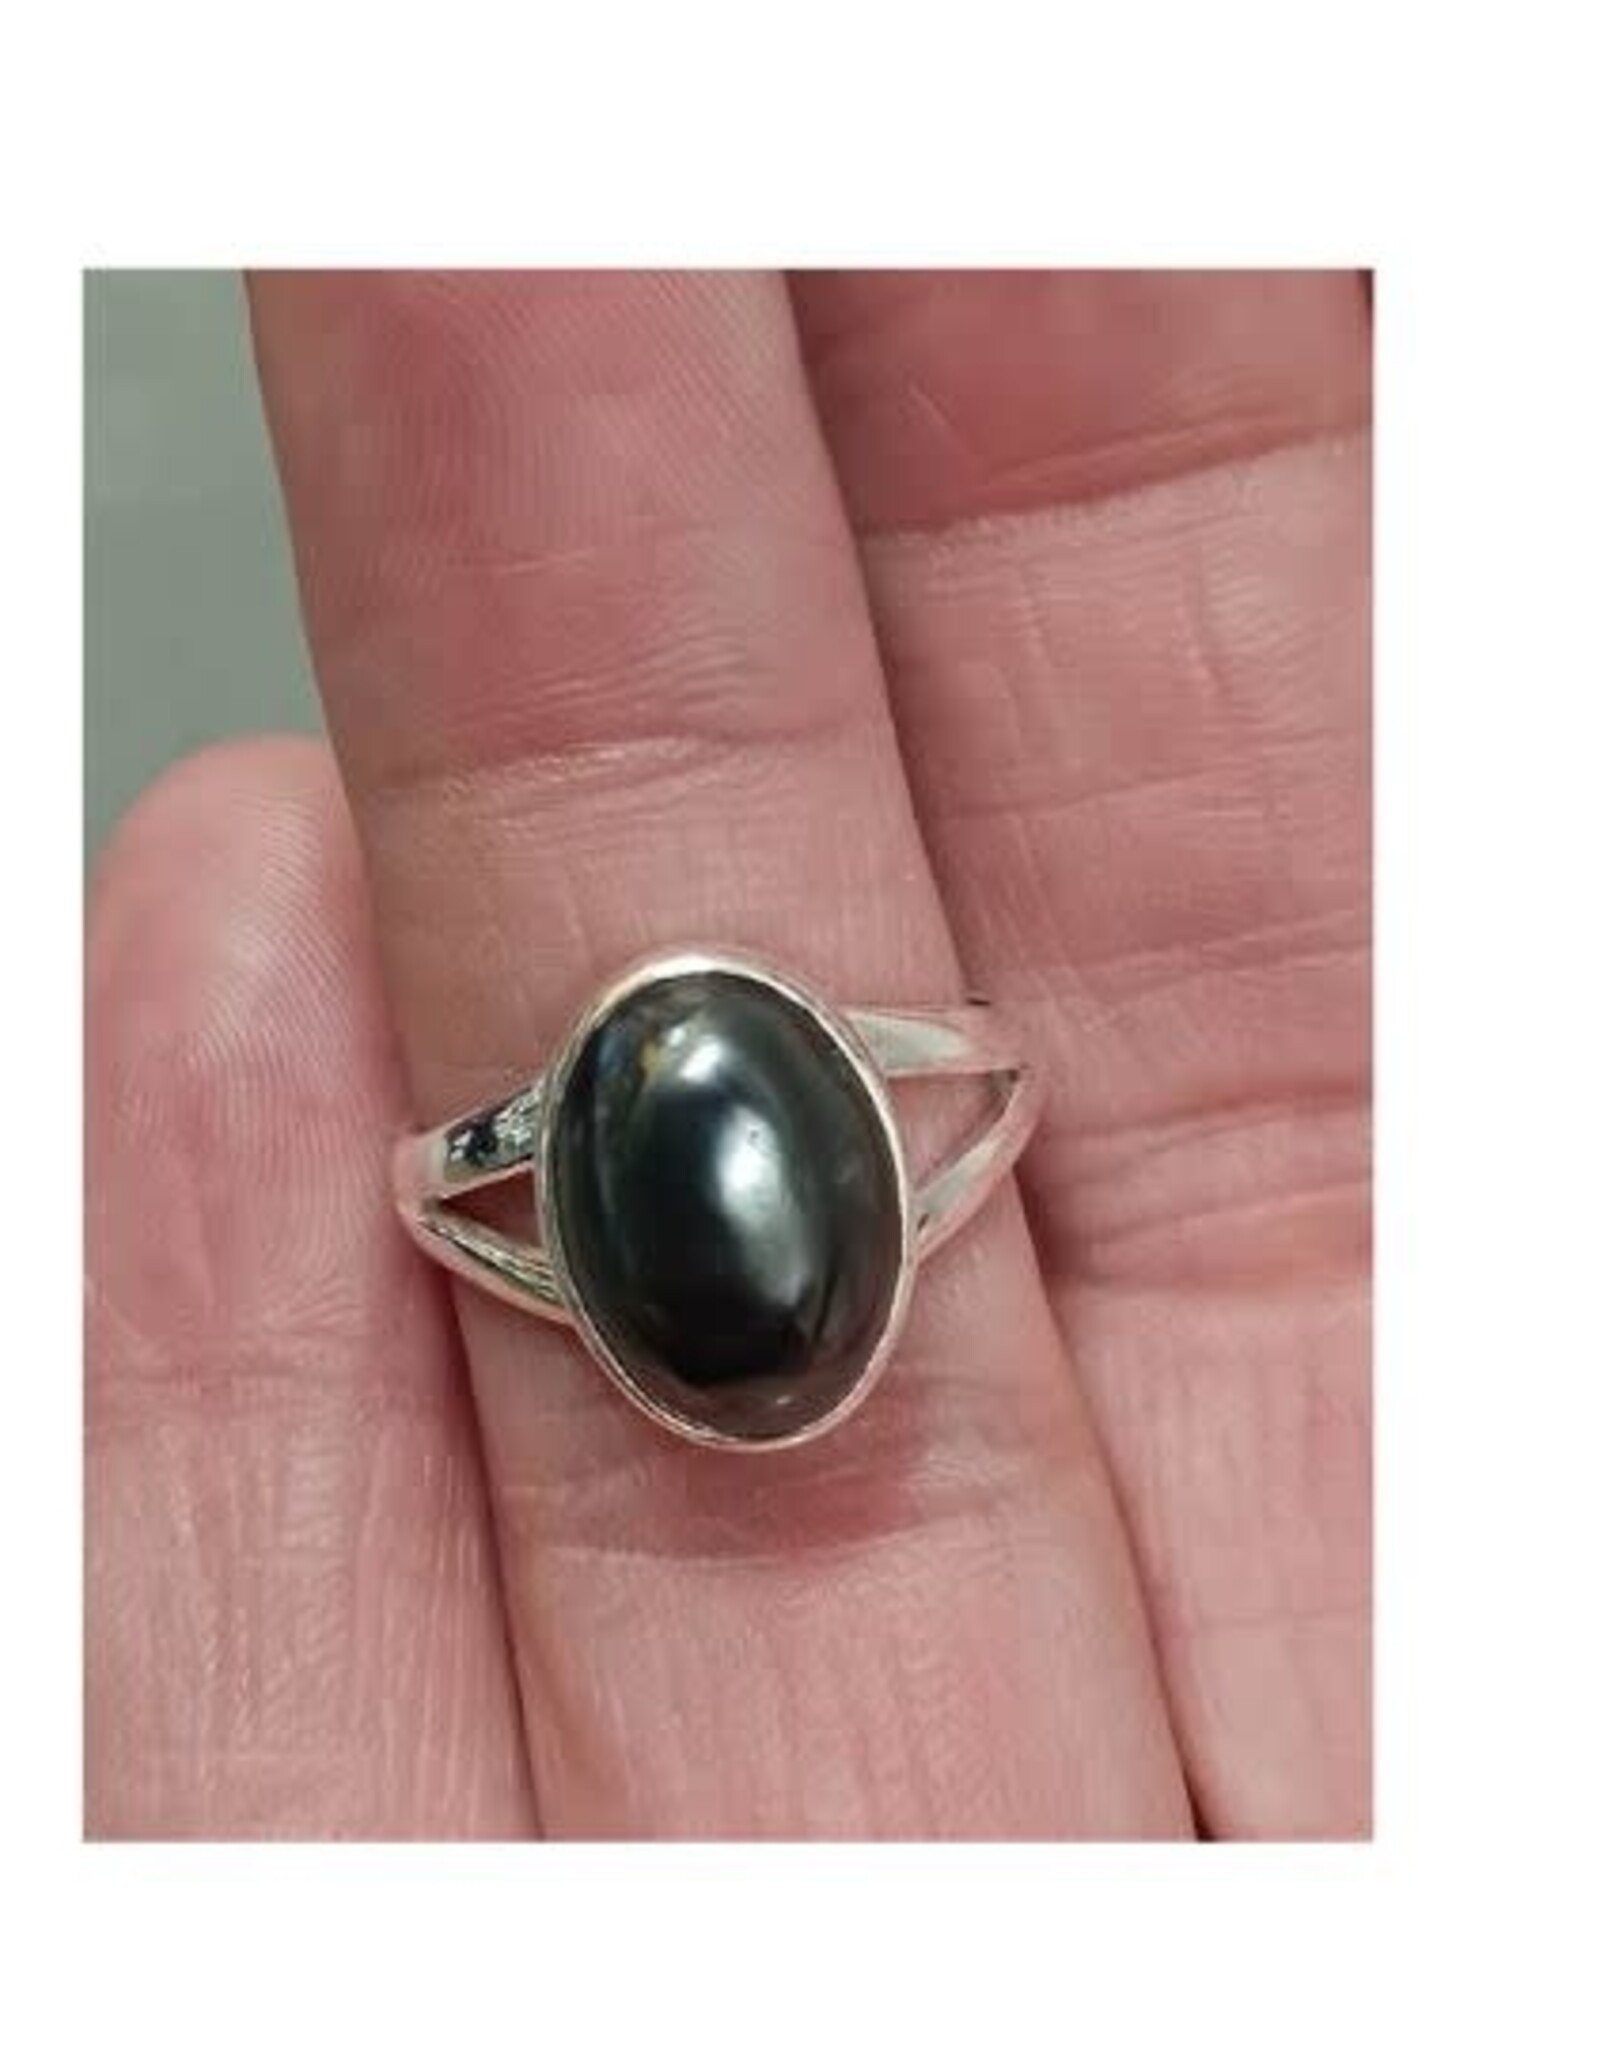 Hematite Ring - Size 10 Sterling Silver